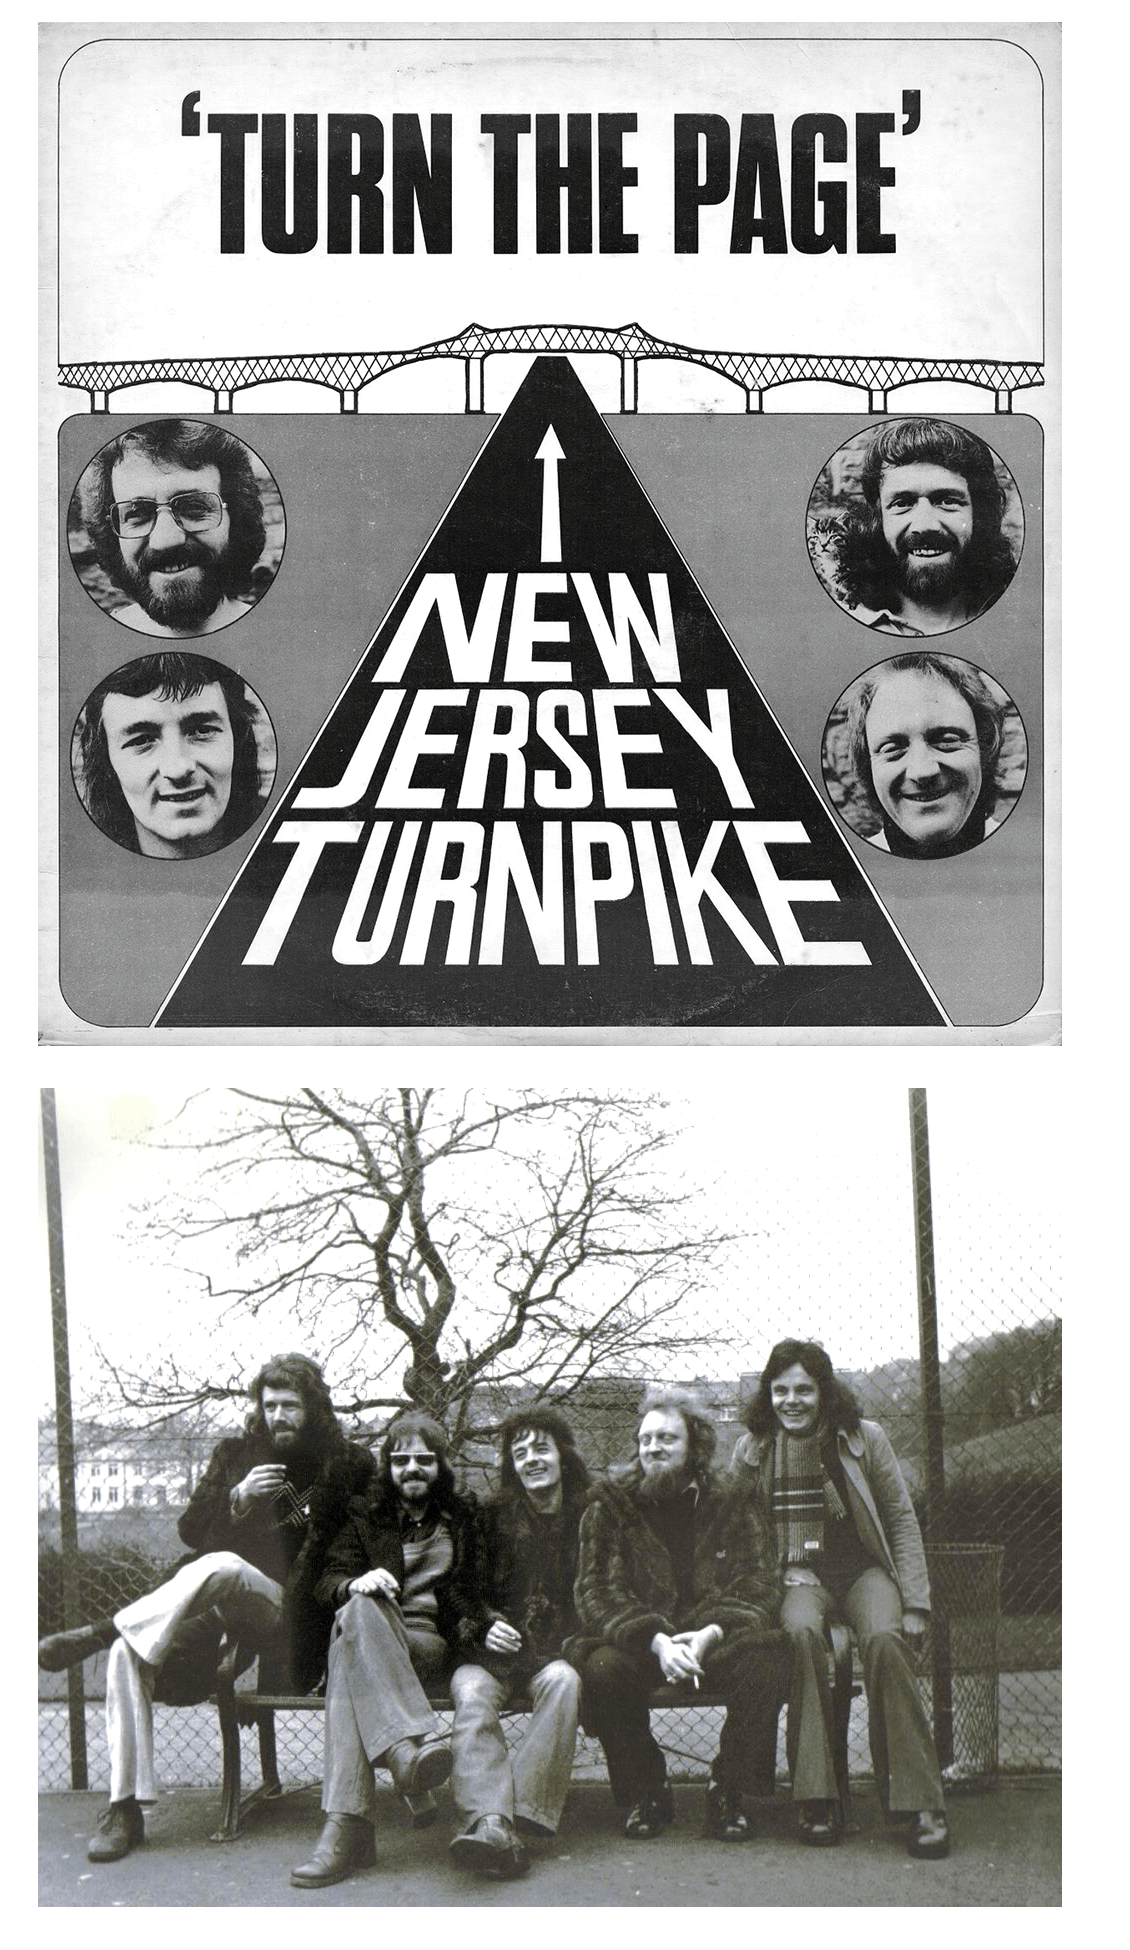 Photos of the New Jersey Turnpike band form the 1970's